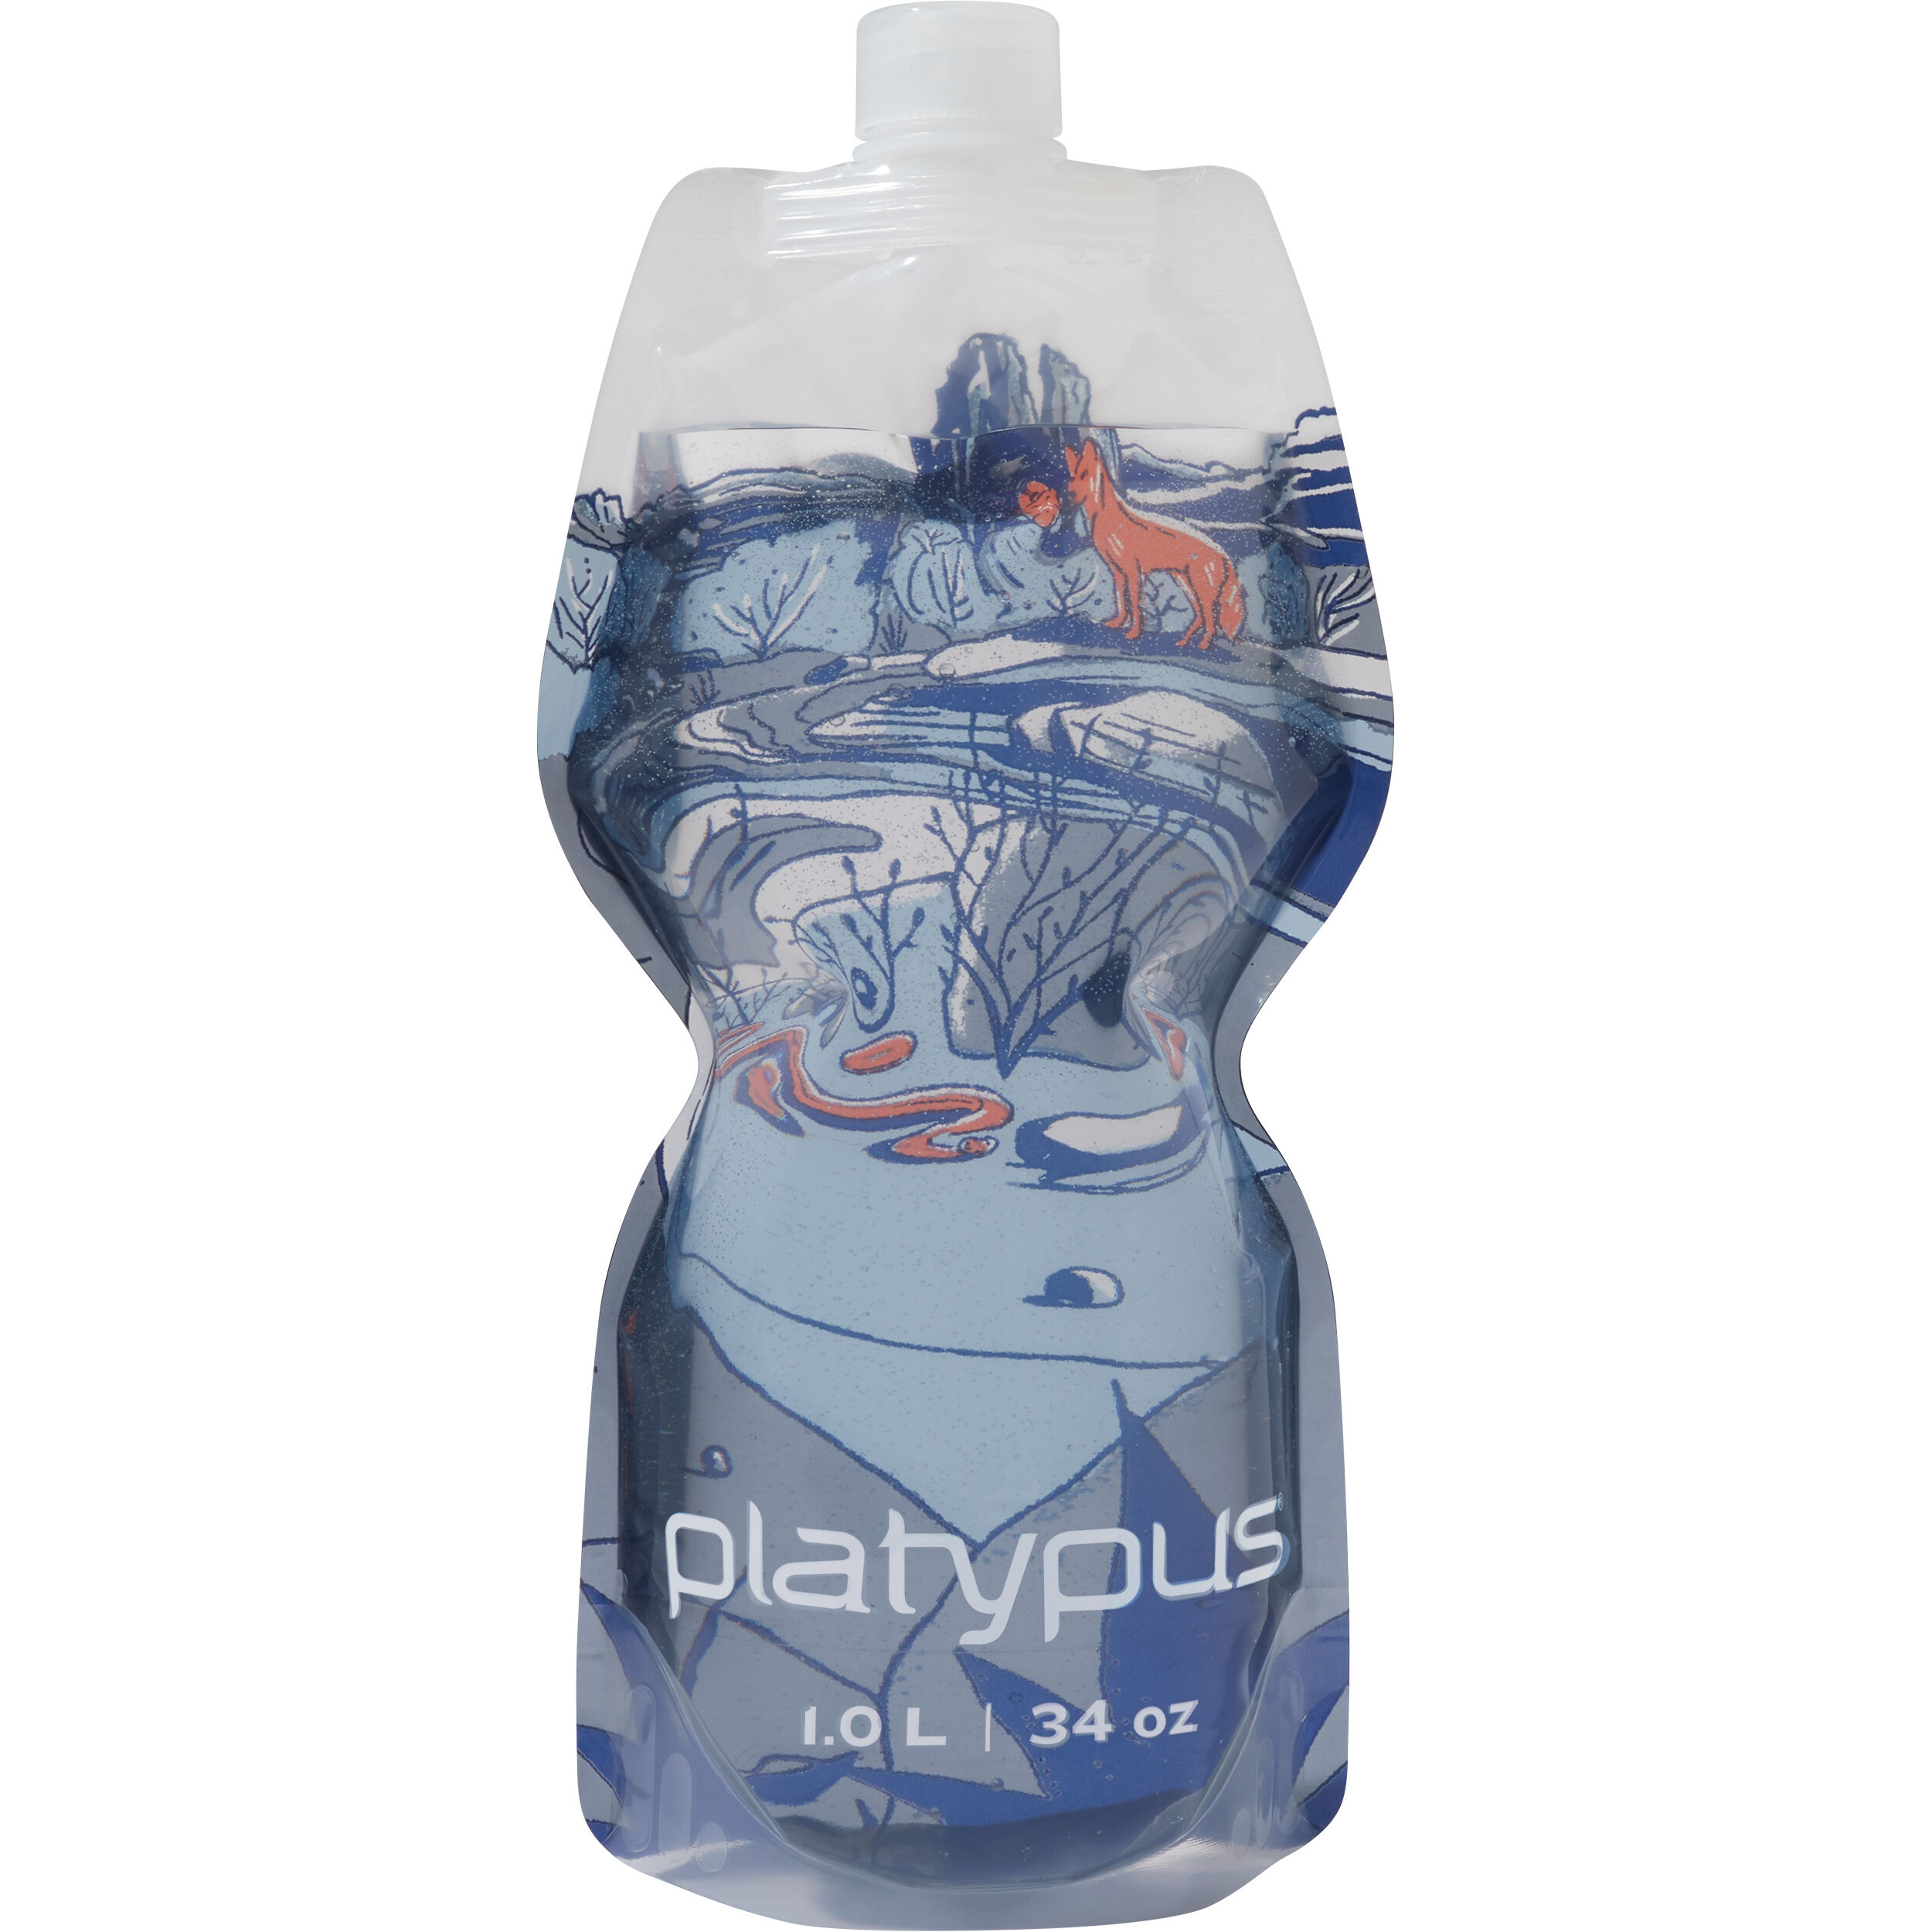 cleaning platypus water bottle